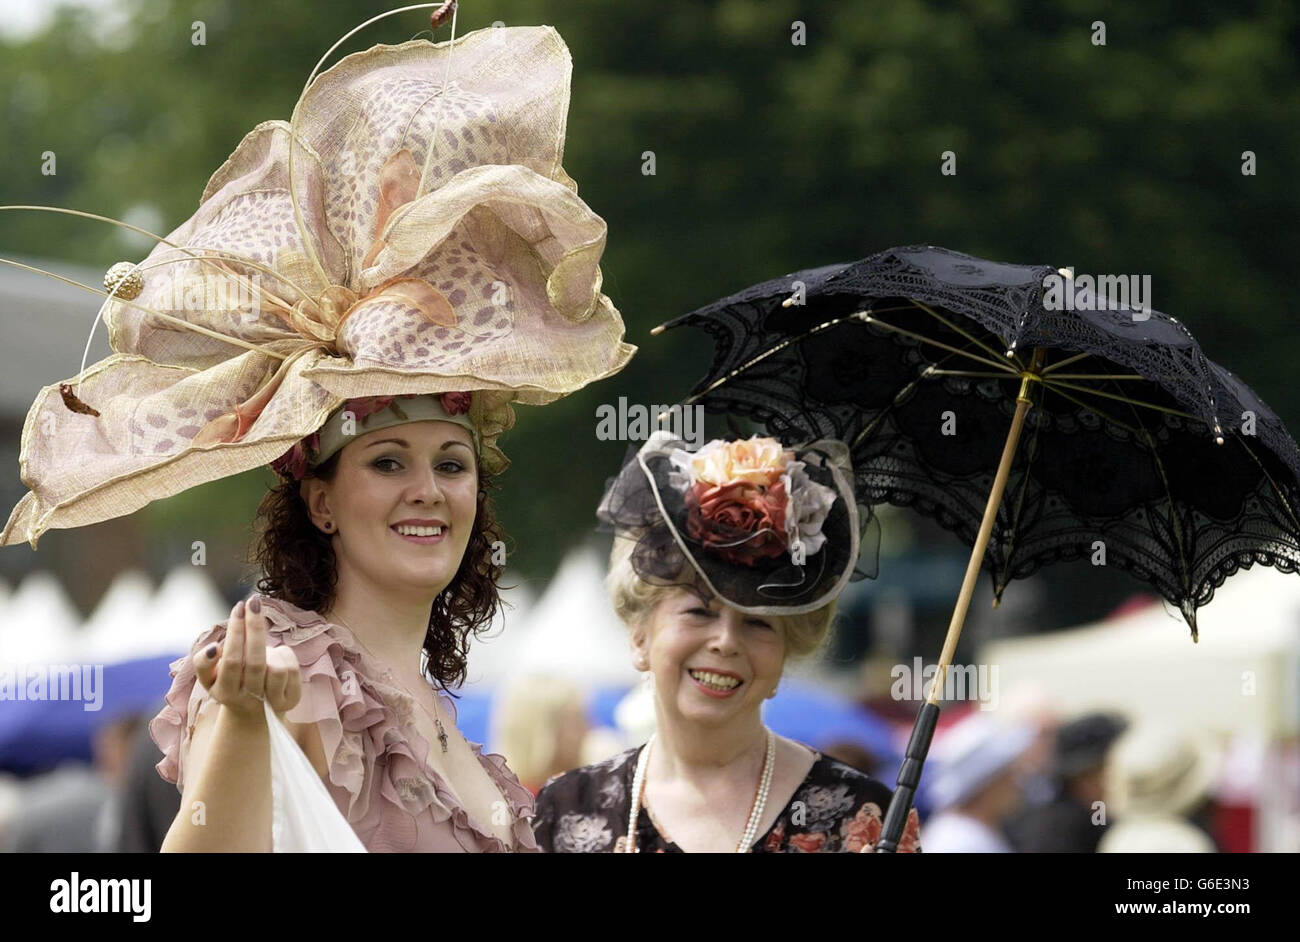 Val Gutteridge (right) the designer behind the hat-maker 'Over the Top'  stands with Kedra Goodall, who models one of her creations, at Ascot for  the first day of the Royal Ascot. The